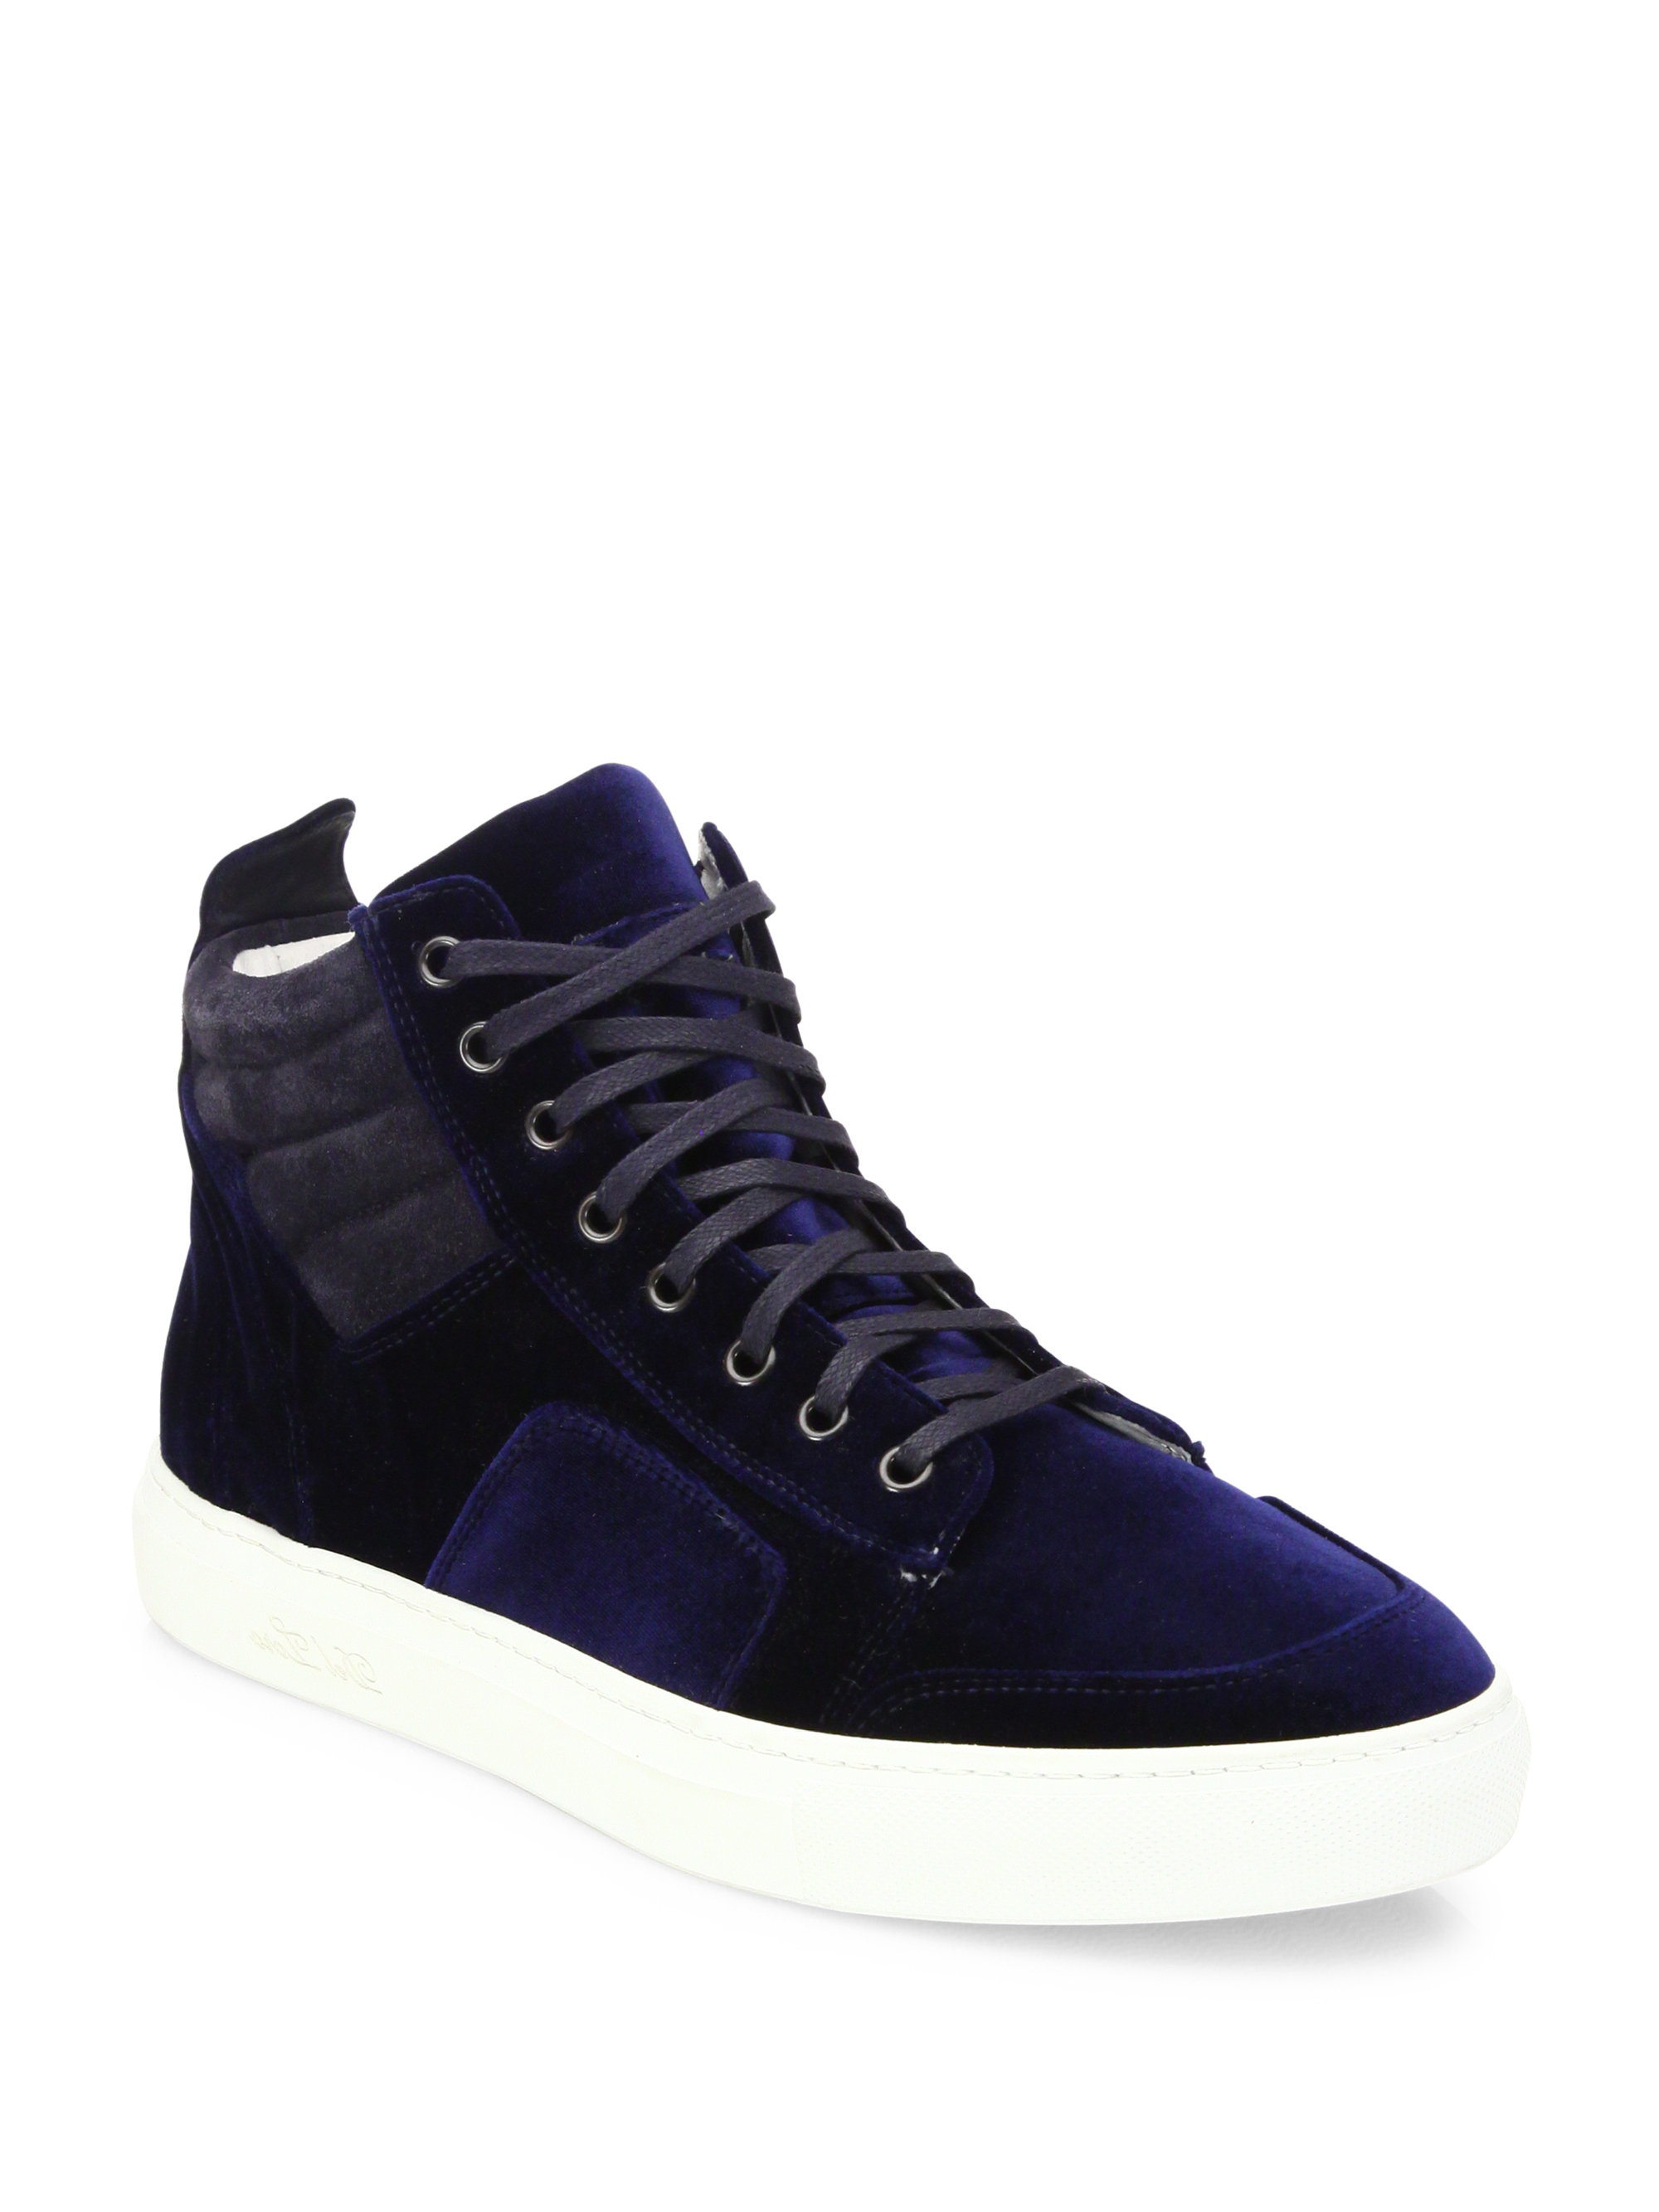 Lyst - Del Toro Lace-up Sneakers in Brown